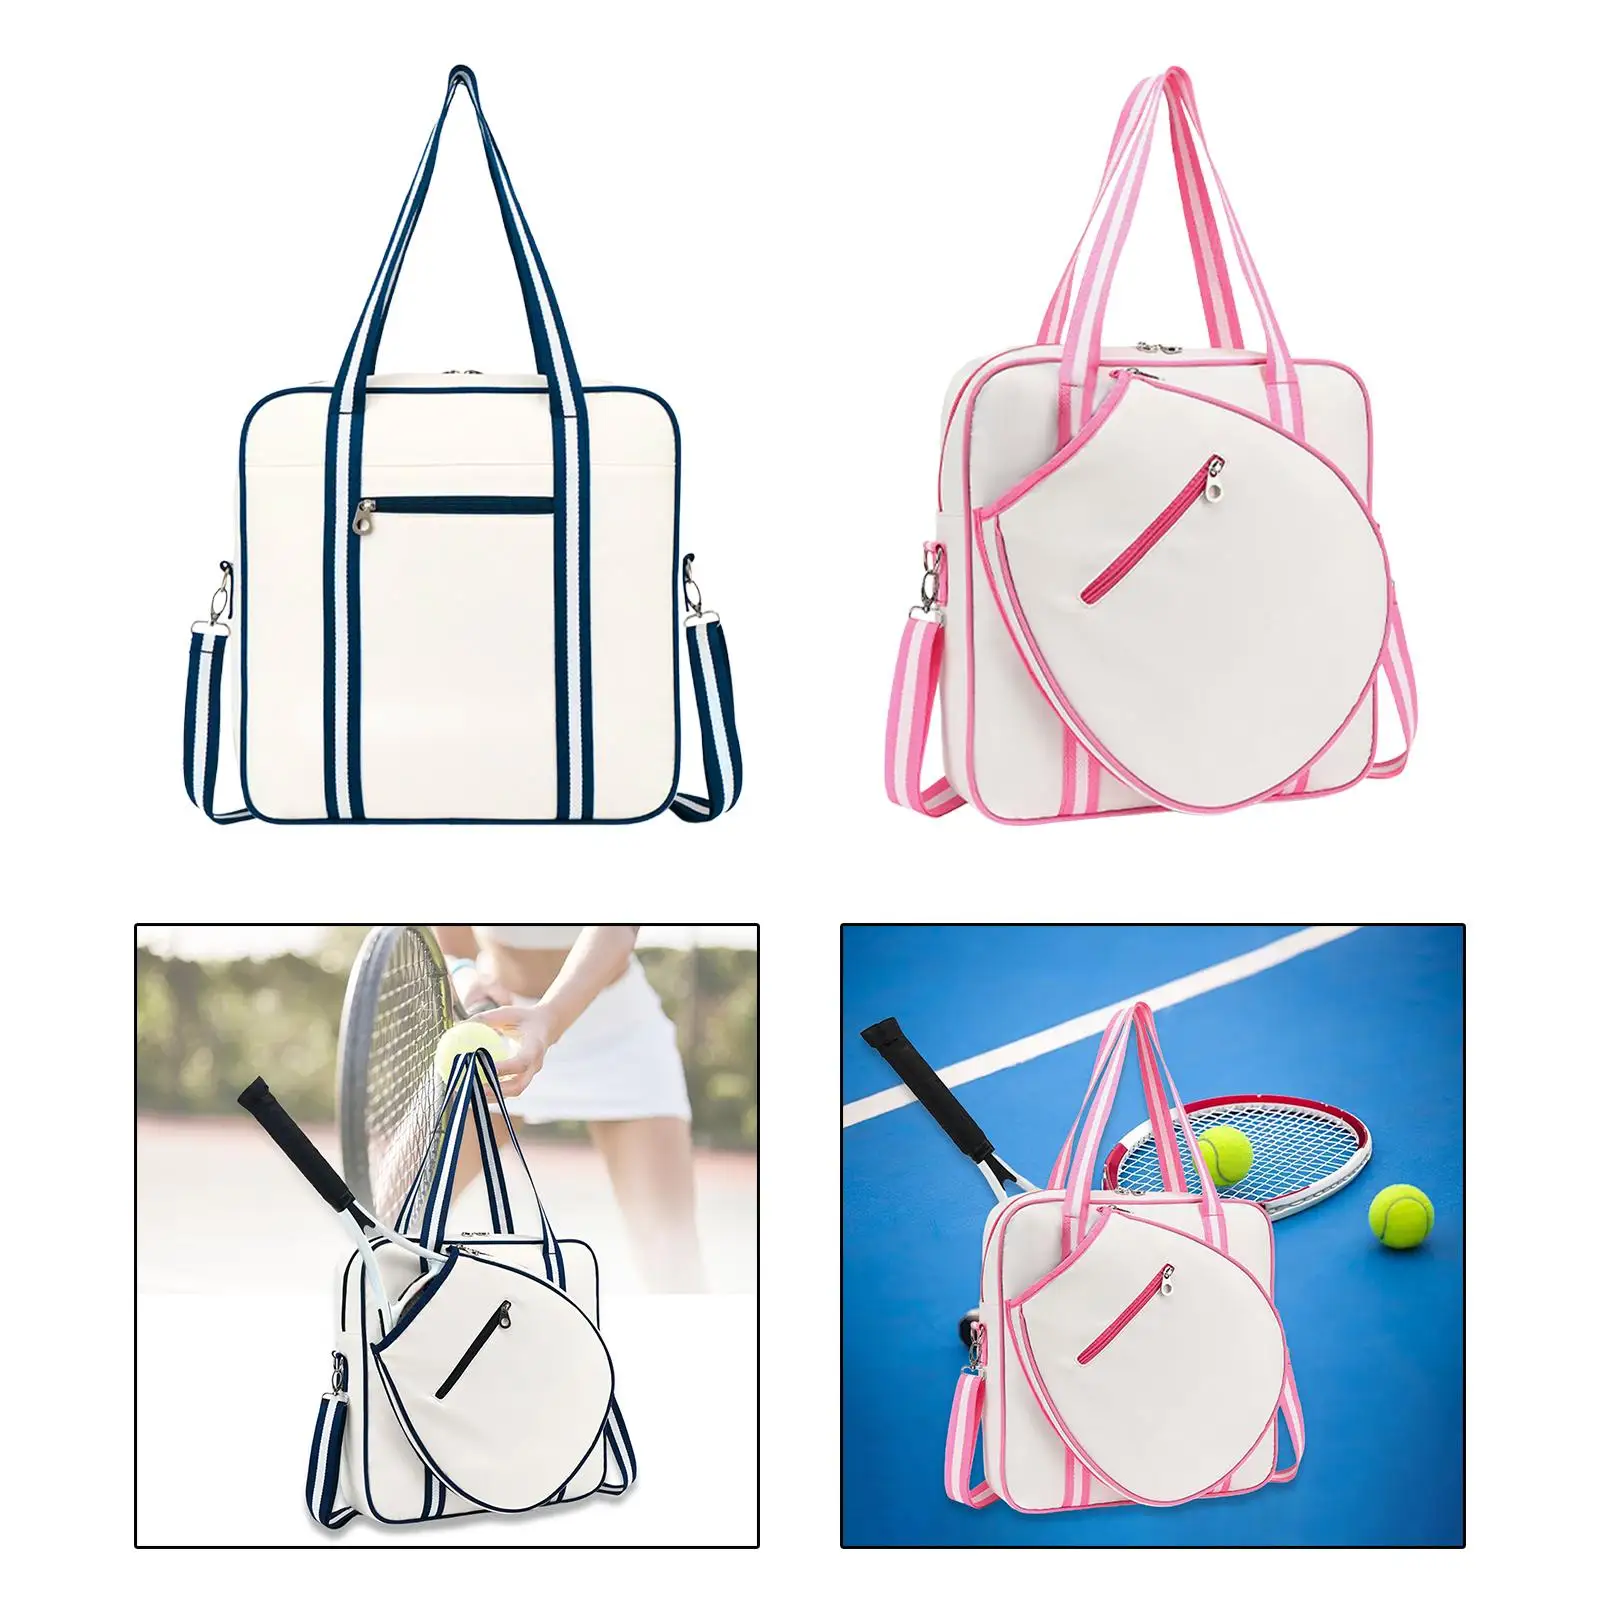 Tennis Racket Shoulder Bag Travel Tote Bag Stylish Multifunctional Sturdy 15x4x15inch Water Resistant for Girls, Boys, Teenagers